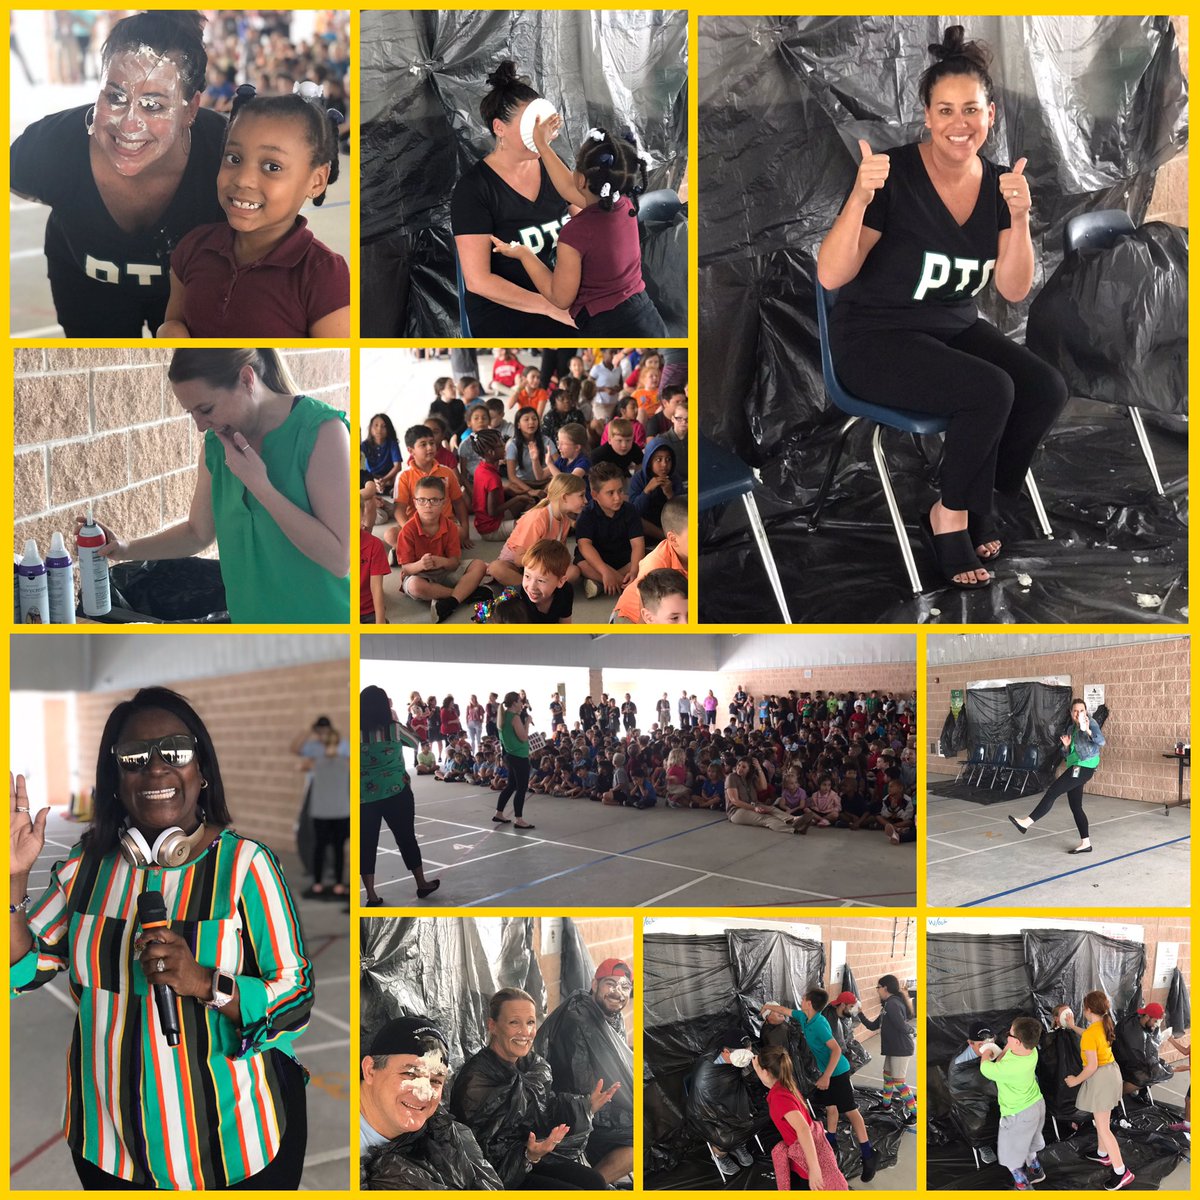 PIE IN THE FACE! Principal Jonas and fellow staff rewarding successful fundraising for SPE funds! #goodsports#excitement#teamwork
#lotsofsmiles @SPEHAWKSNAPLES @collierschools